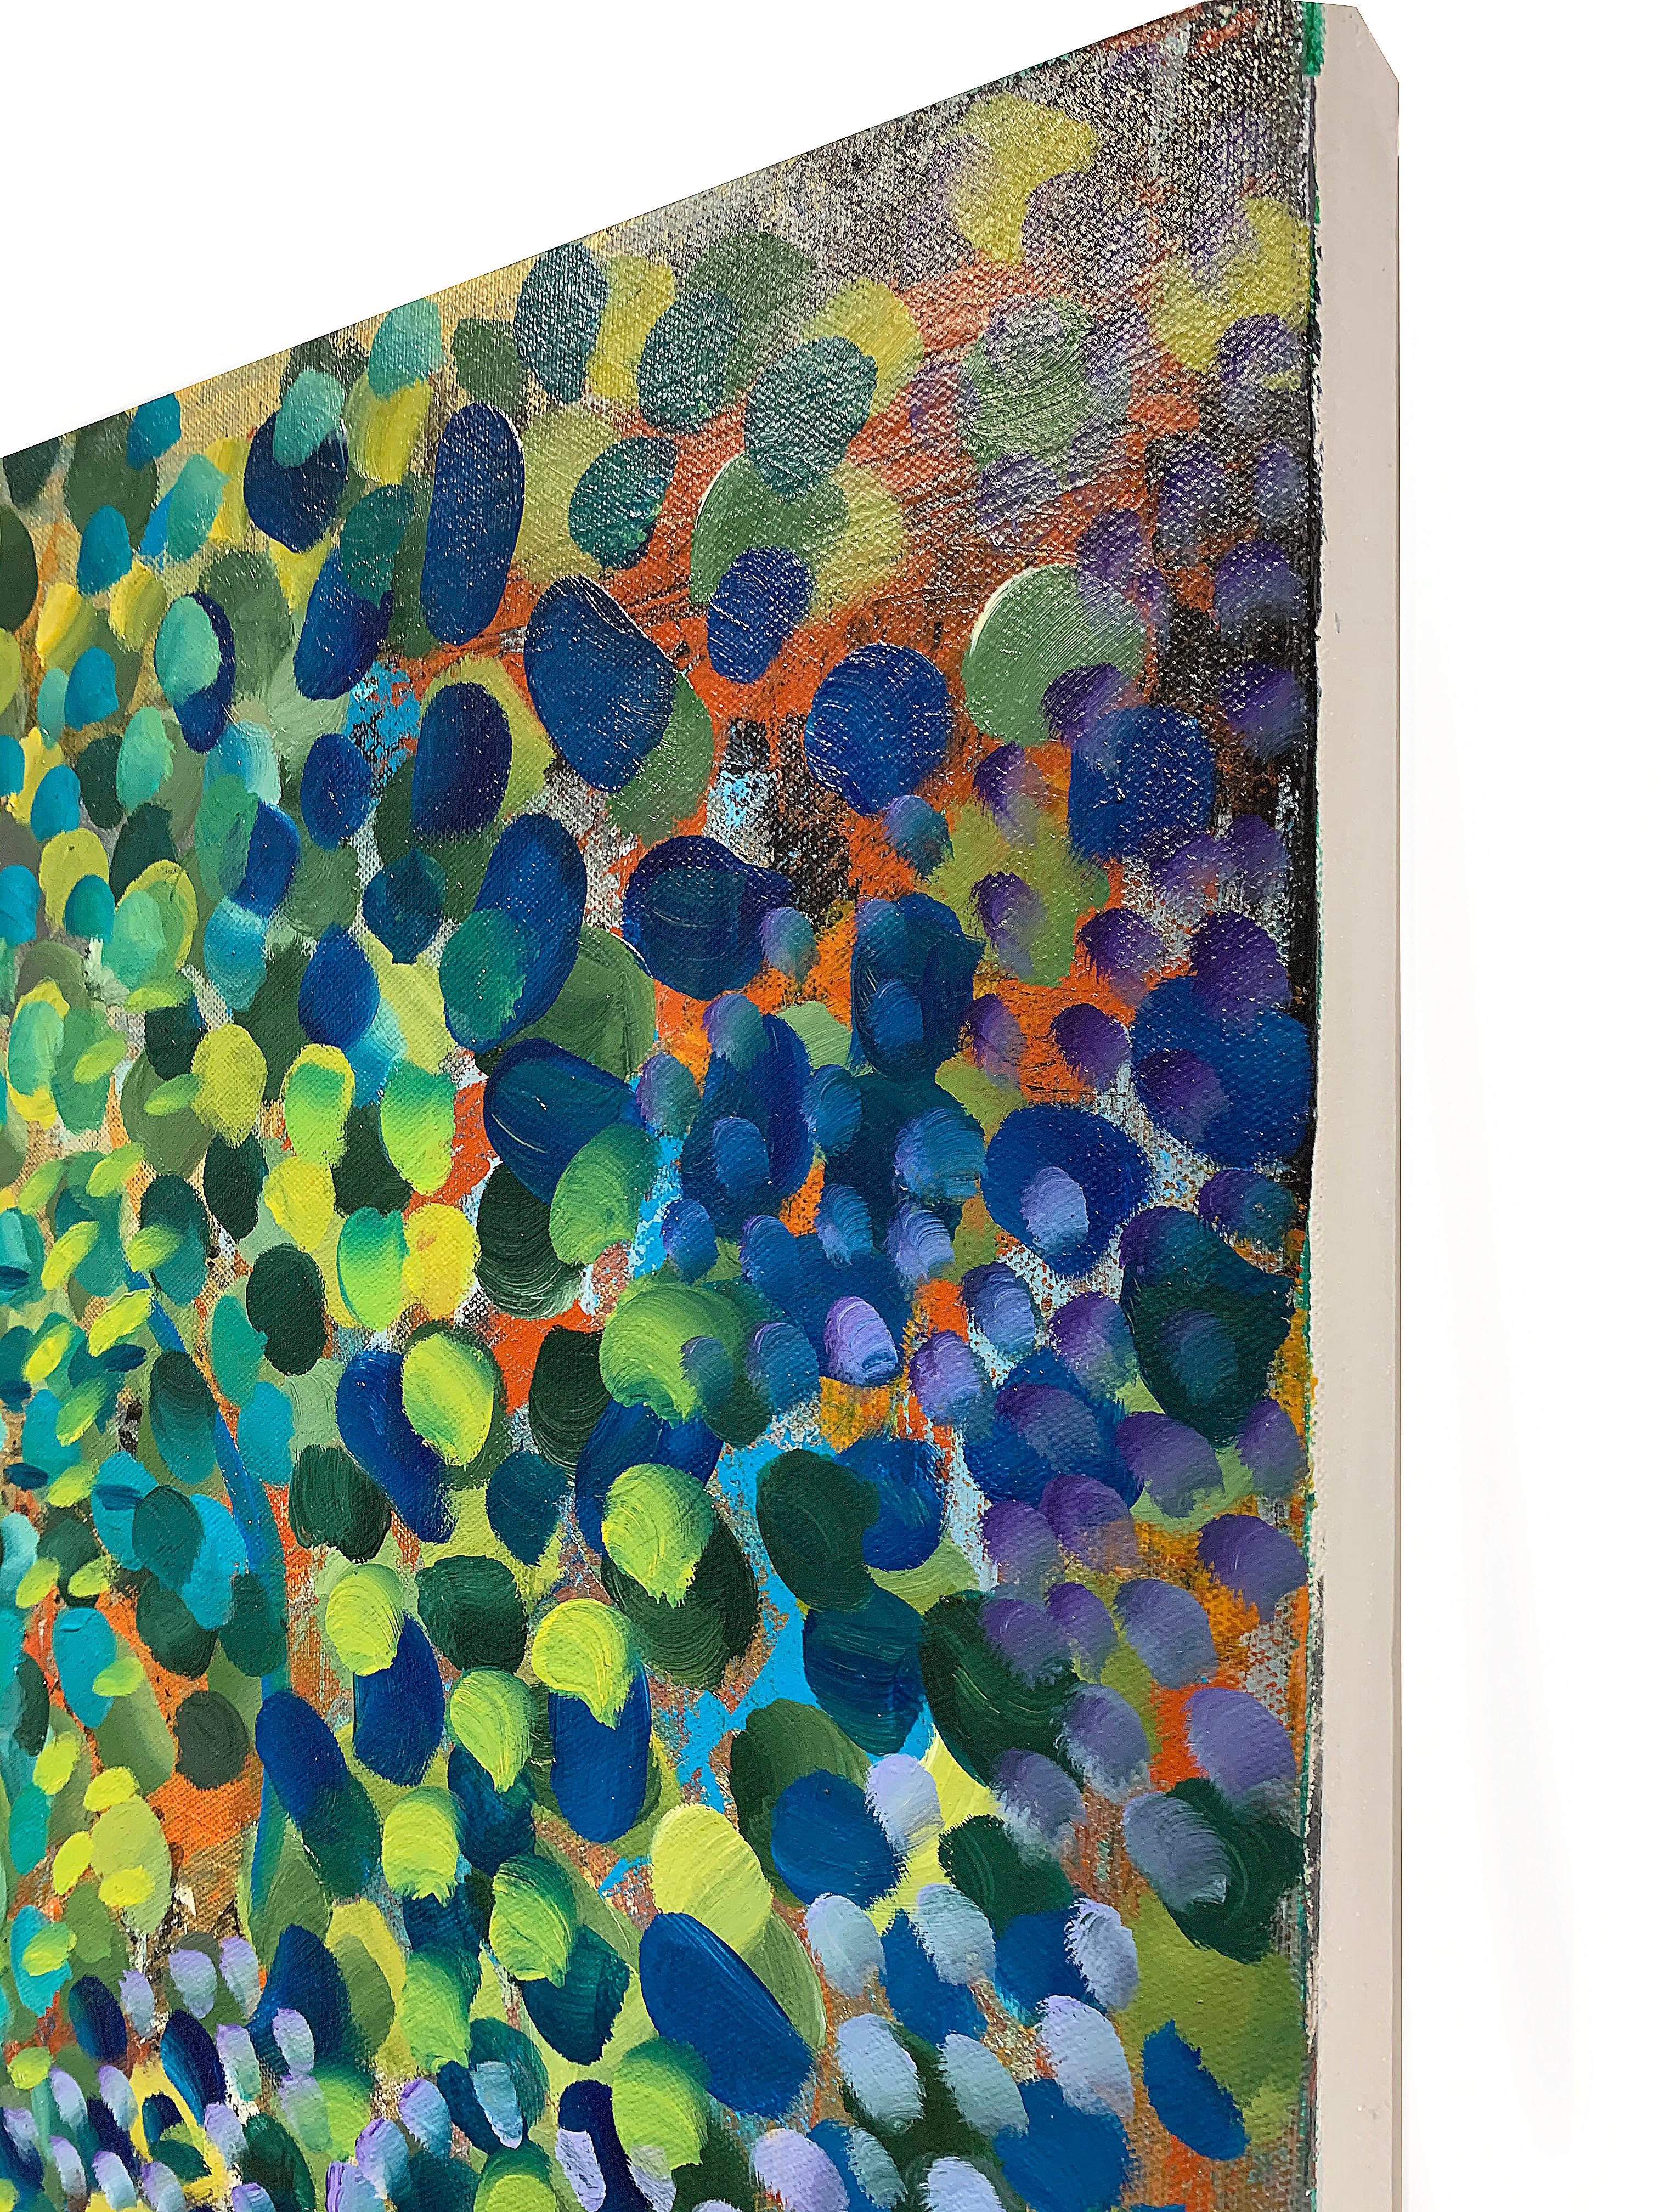 Untitled, large abstract, acrylic on canvas painting green, blue, green, orange  - Painting by Kathleen Kane-Murrell